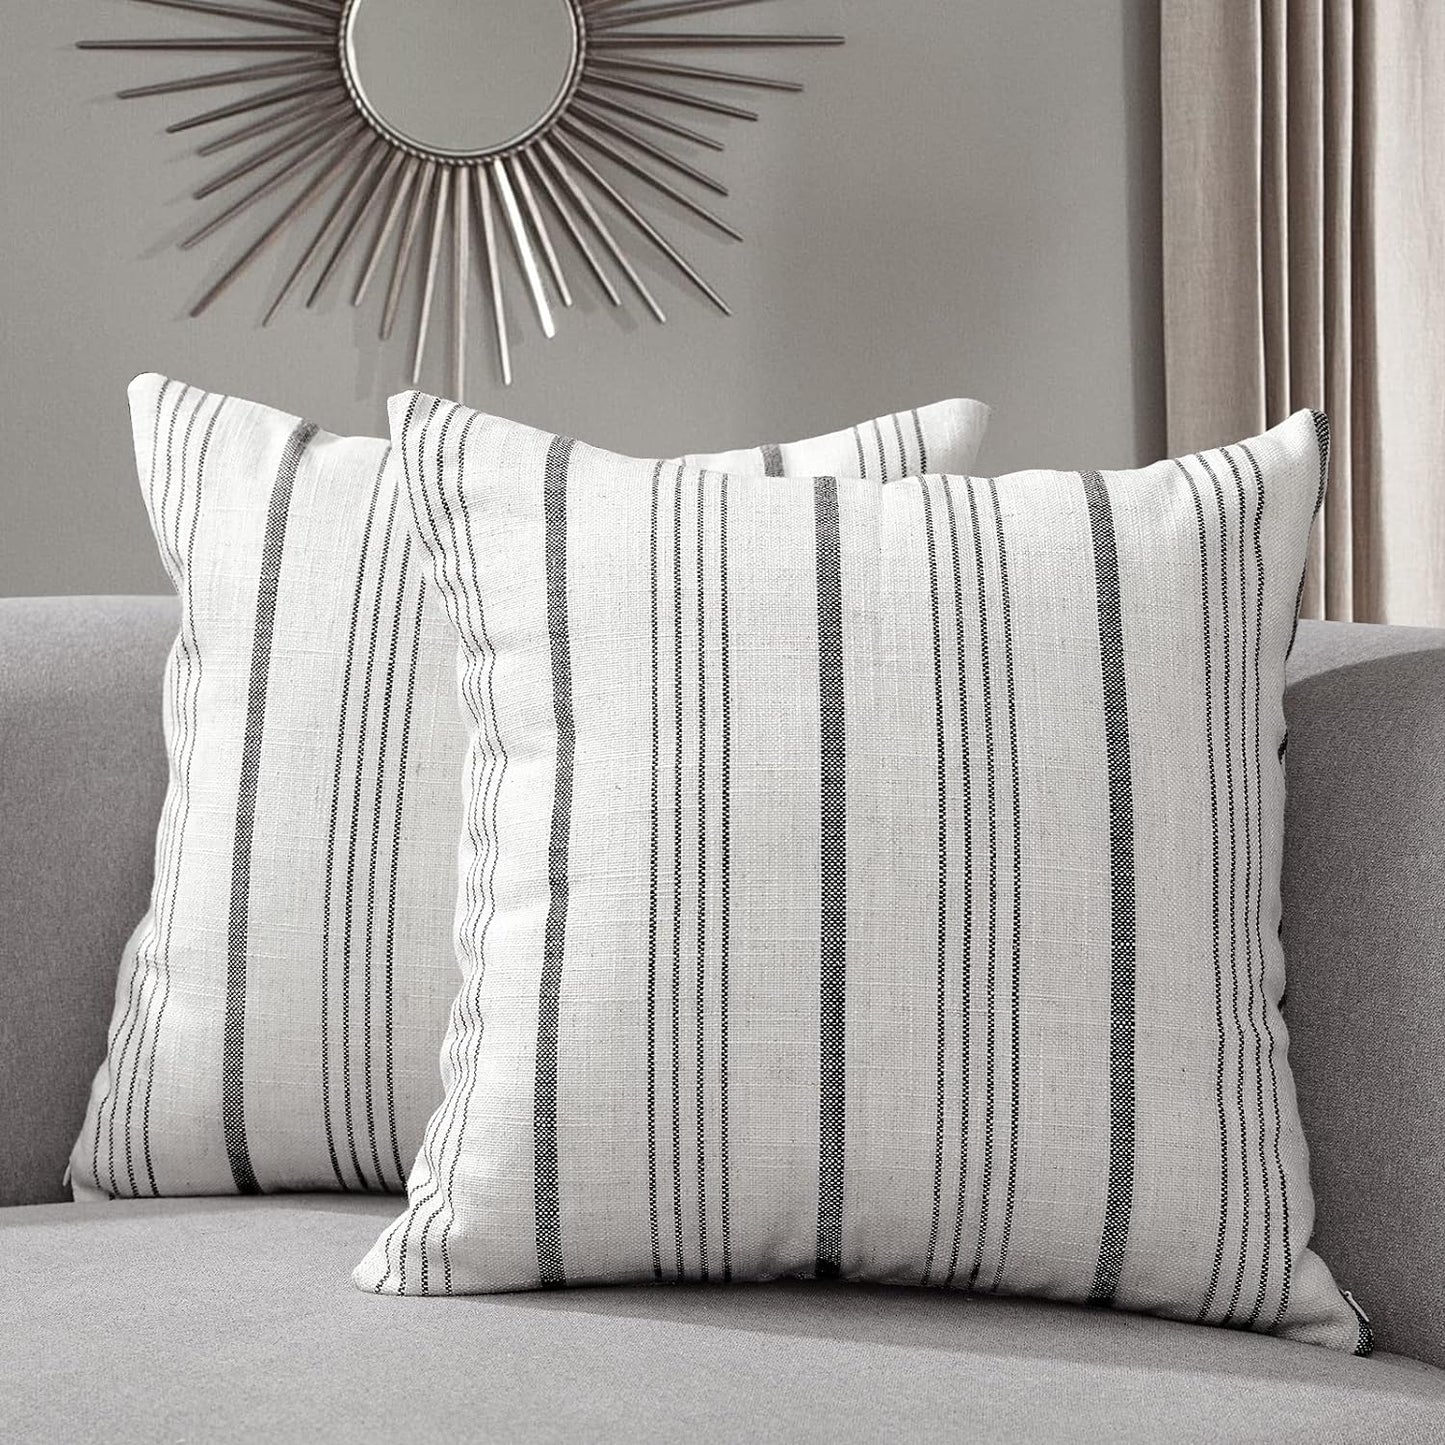 Sunlit Decorative Farmhouse Throw Pillow Case, Cover Only, Set of 2 Cream/Off-White with Charcoal Stripes Square Pillow Cover, 18" x 18", Textured Linen Throw Cushion Covers